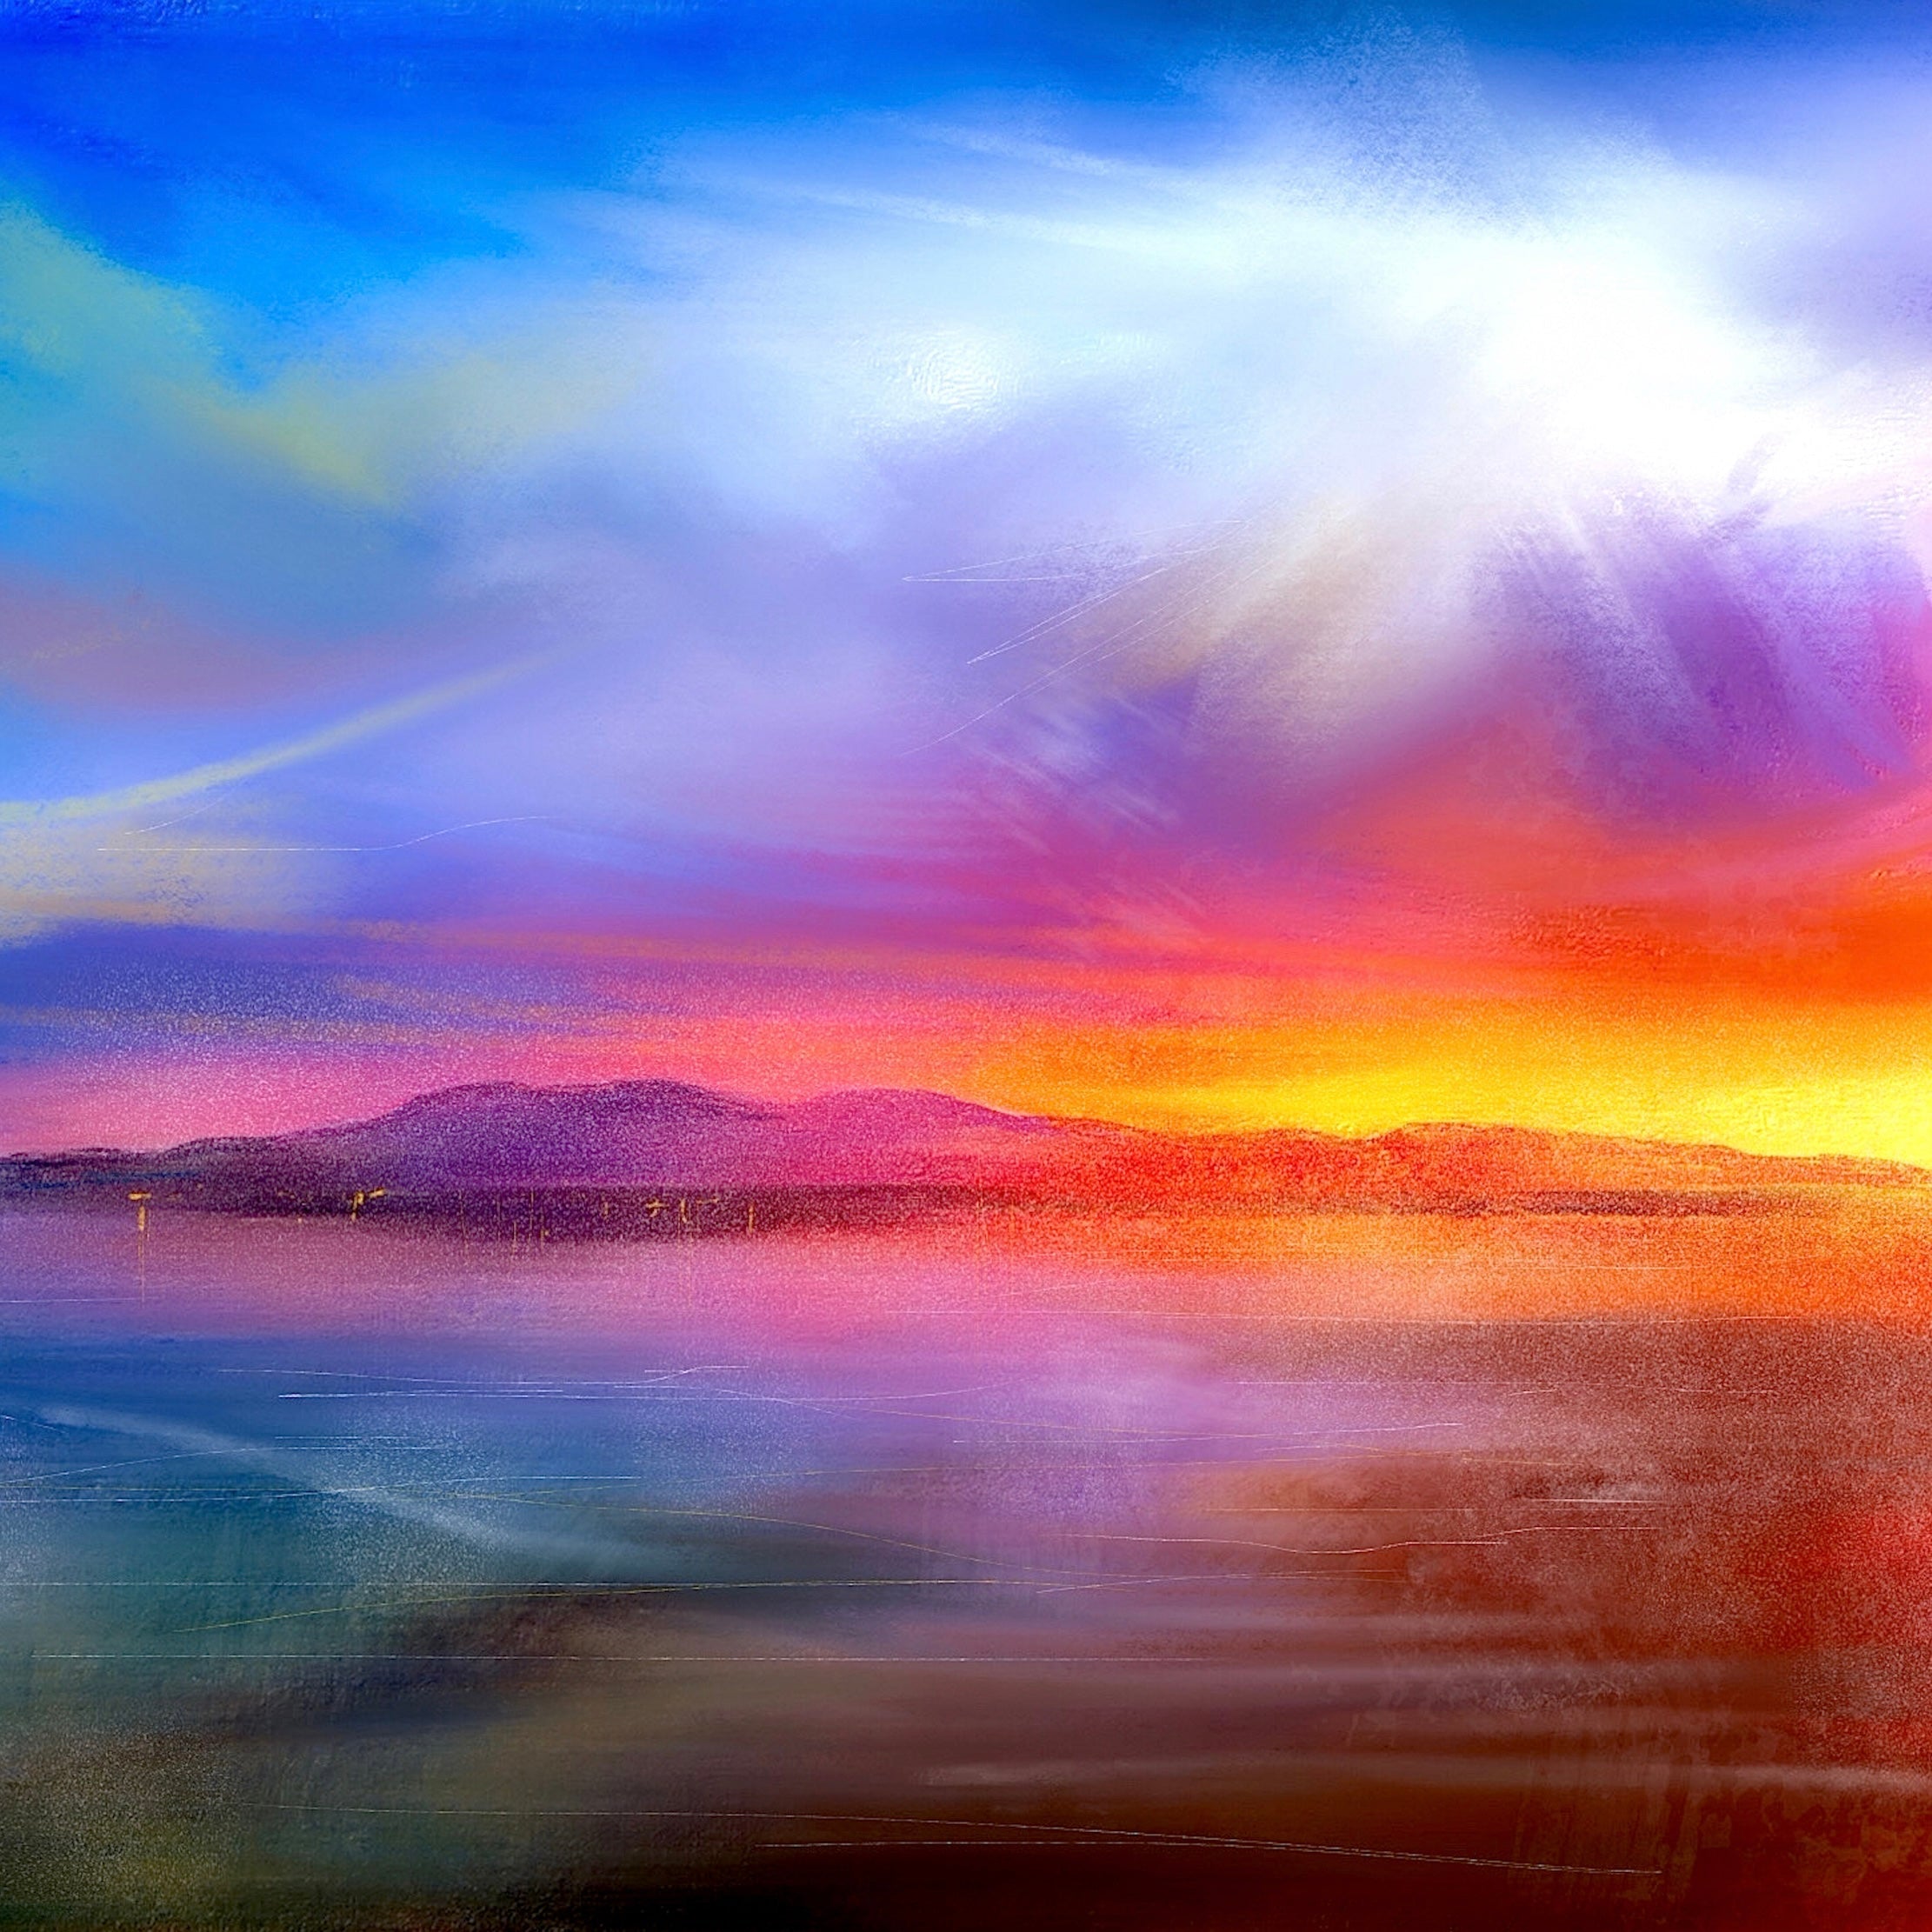 Arran Sunset | Scotland In Your Pocket Art Print-Scotland In Your Pocket Framed Prints-Arran Art Gallery-Paintings, Prints, Homeware, Art Gifts From Scotland By Scottish Artist Kevin Hunter